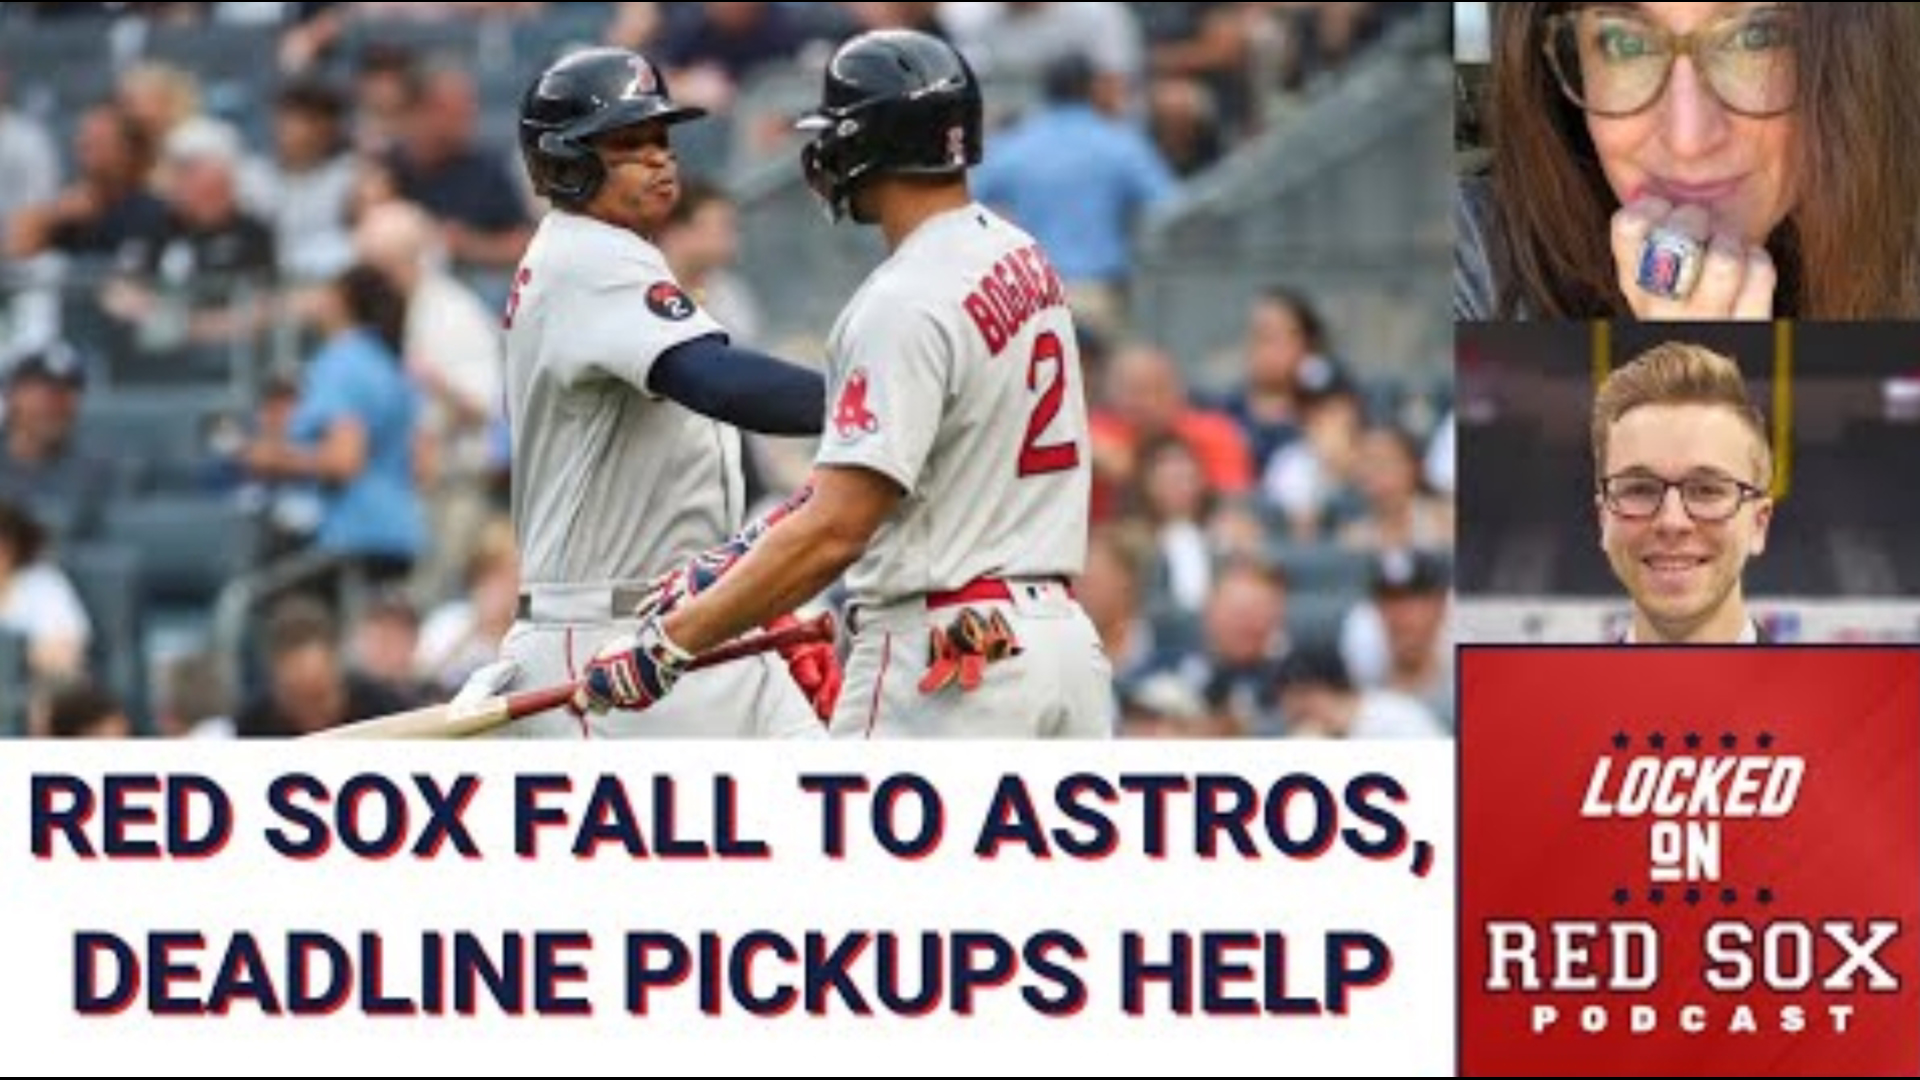 Now that the trade deadline has passed, this is the time when the Red Sox need to go on a run if they want to make the playoffs.